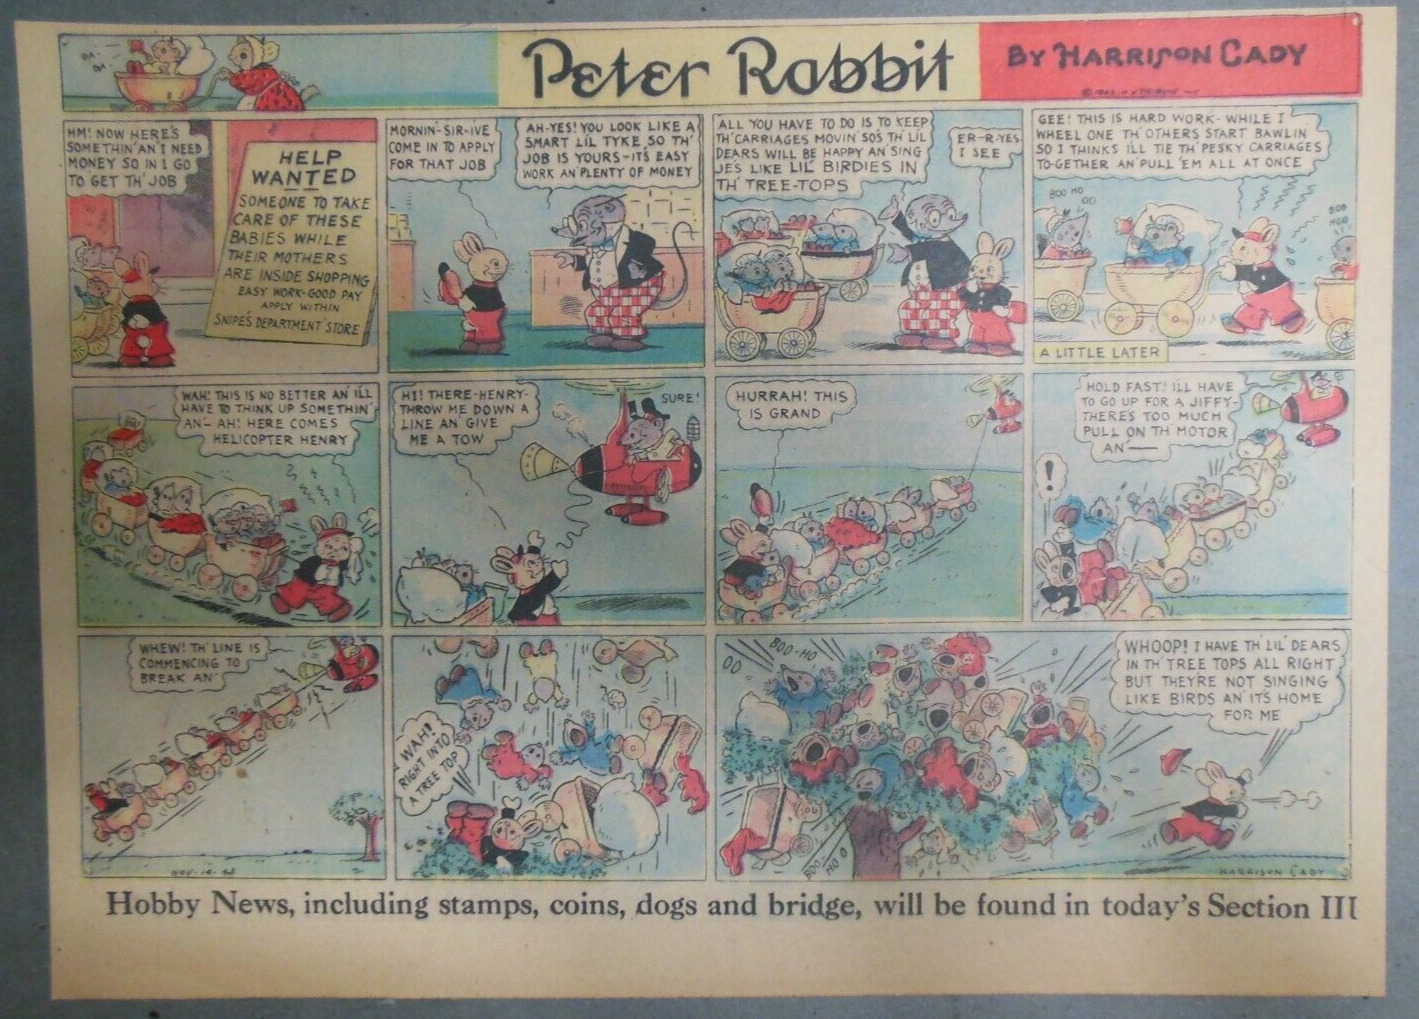 Peter Rabbit Sunday Page by Harrison Cady from 11/14/1943 Size: 11 x 15 inches